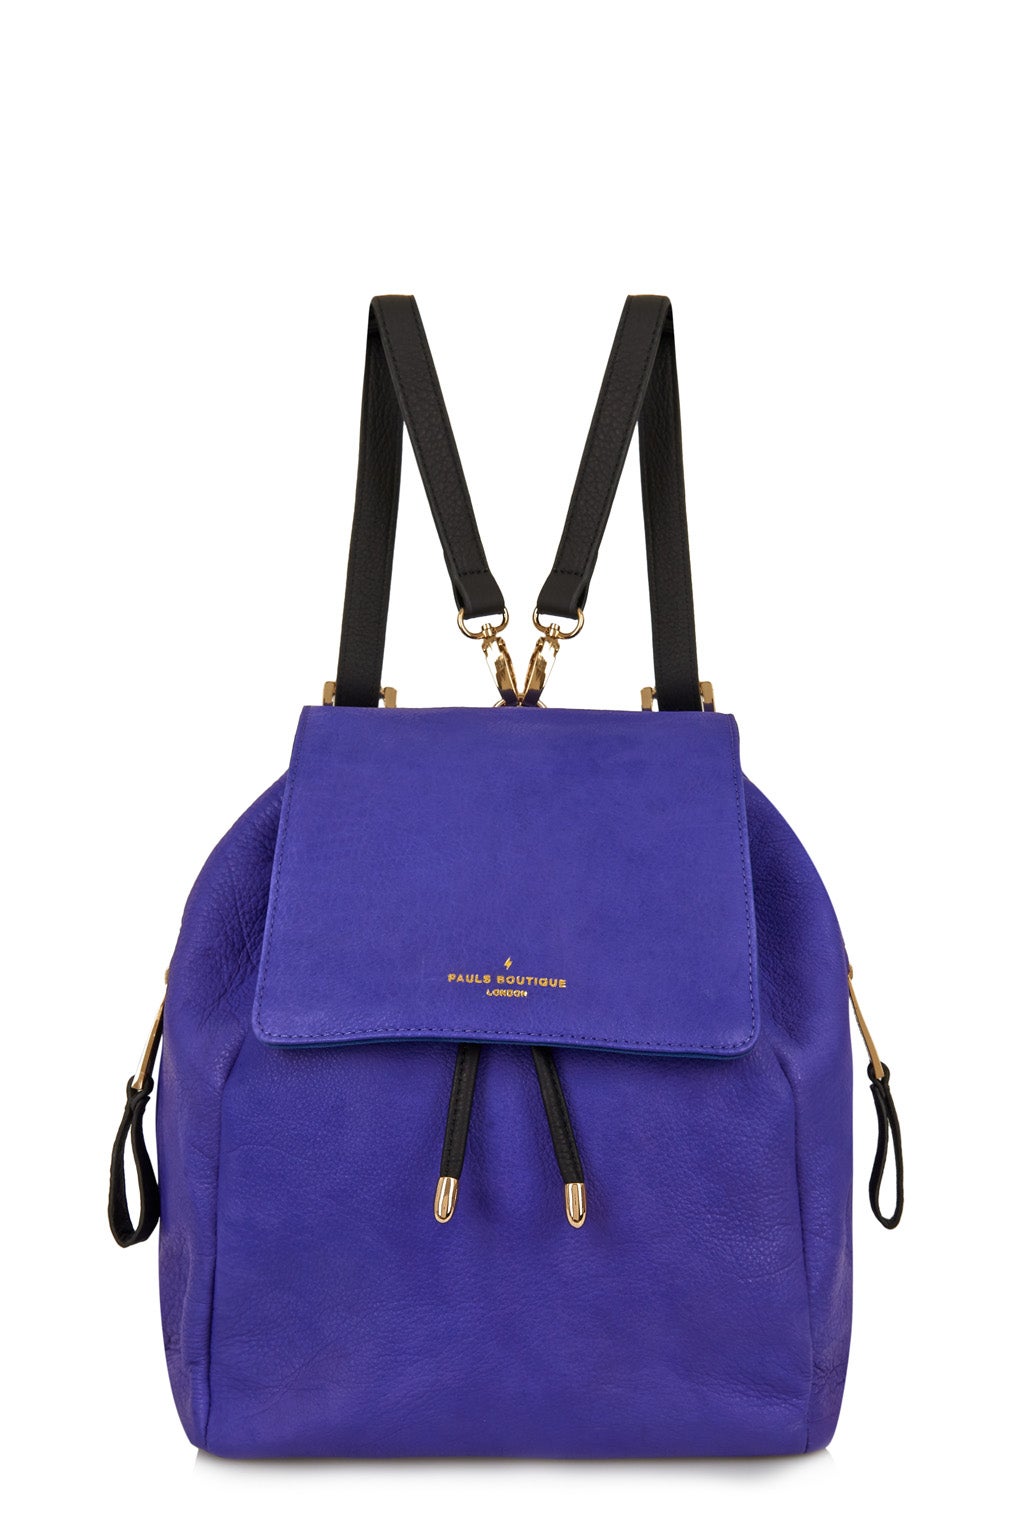 Paul Boutique's Gwyneth backpack will be reduced from £135 to £108